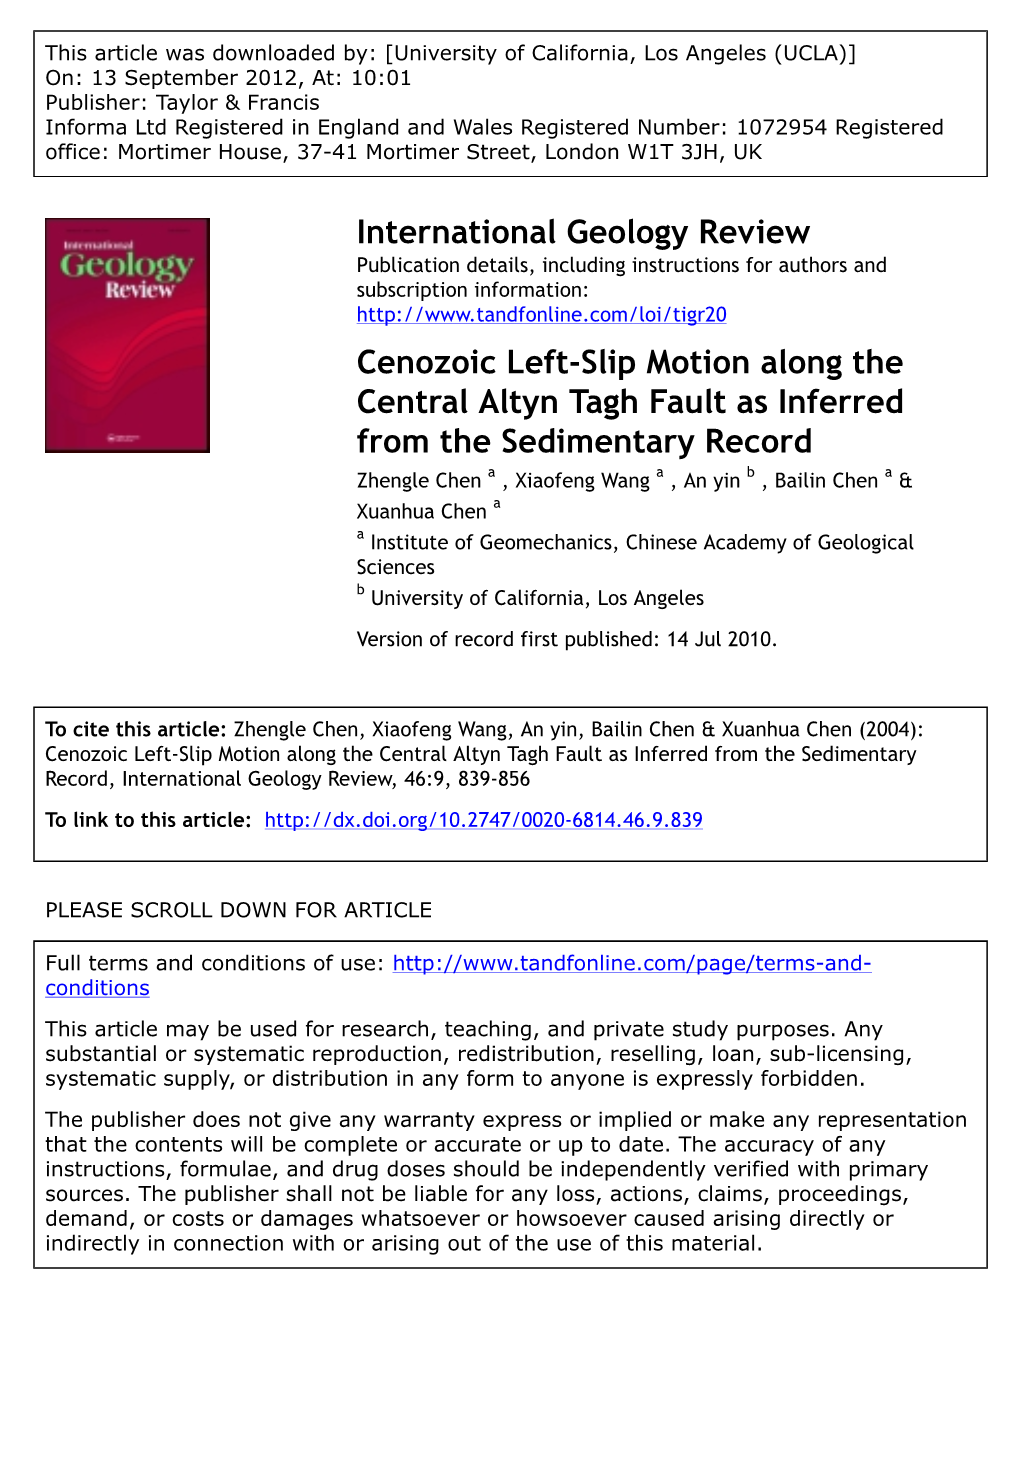 Cenozoic Left-Slip Motion Along the Central Altyn Tagh Fault As Inferred